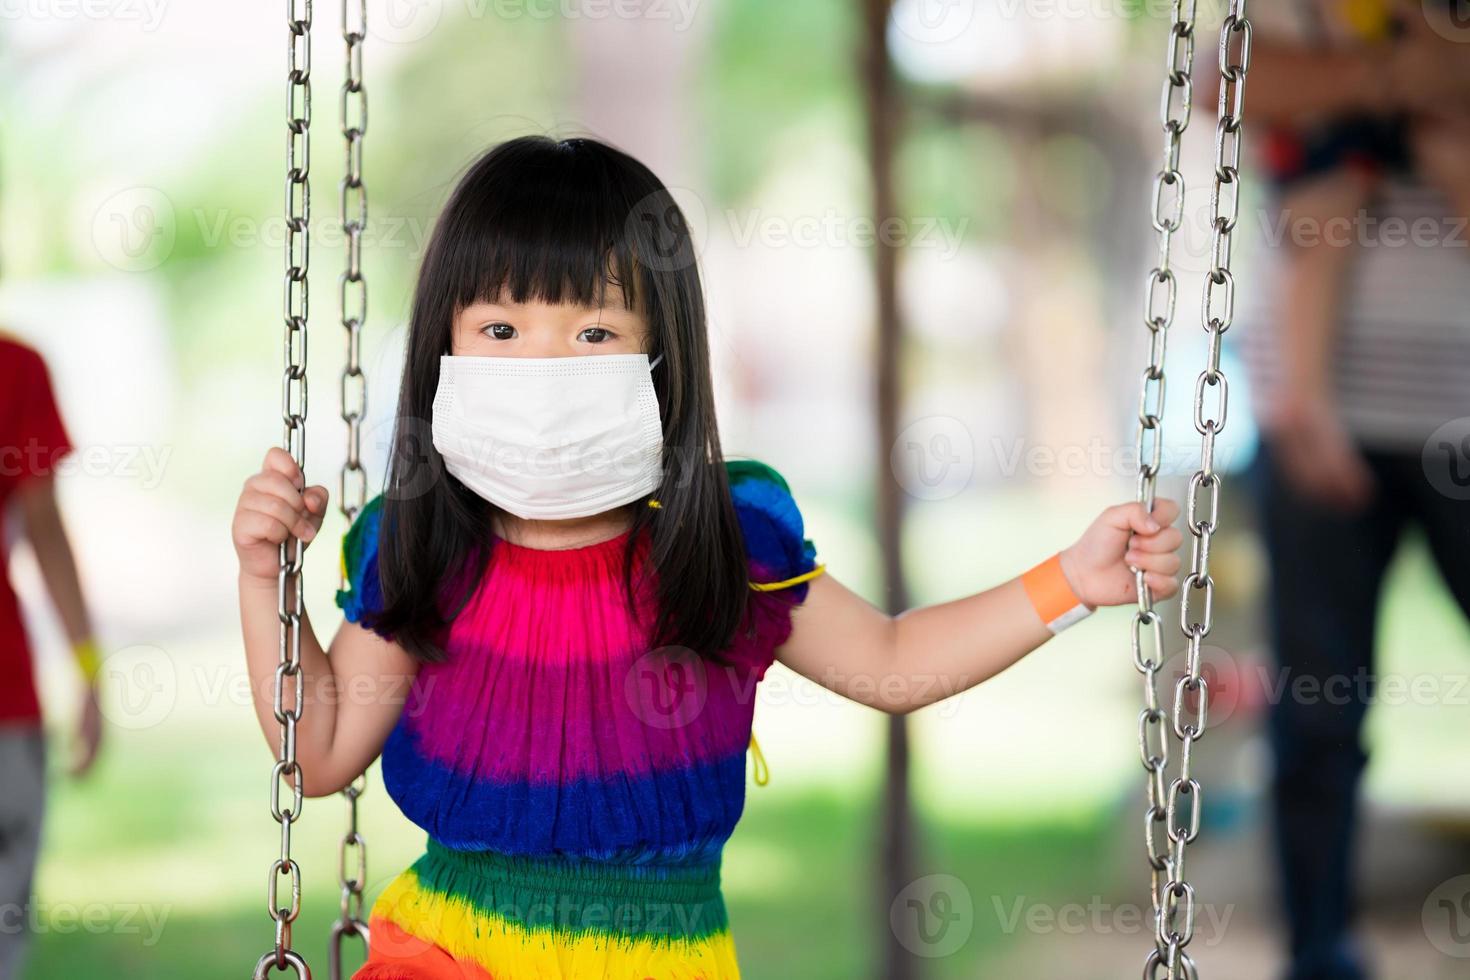 Cute girl wear white medical face mask to prevent the spread of coronavirus COVID 19, Little child sat on playground swing in a crowded park, A 4 year old kid is wearing colorful dress, New Normal photo